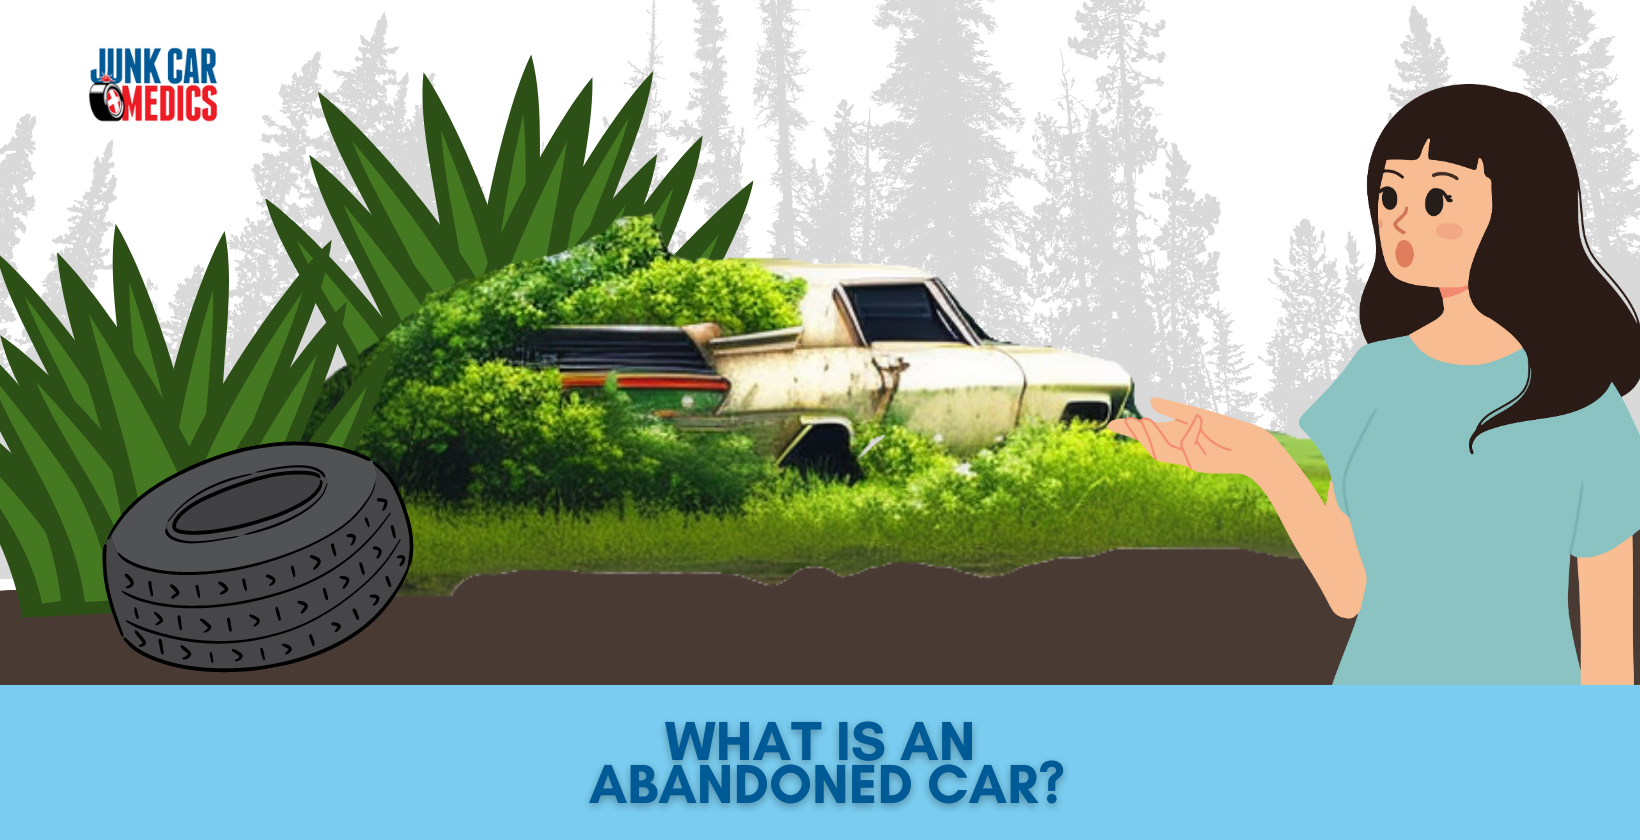 What is an Abandoned Car?